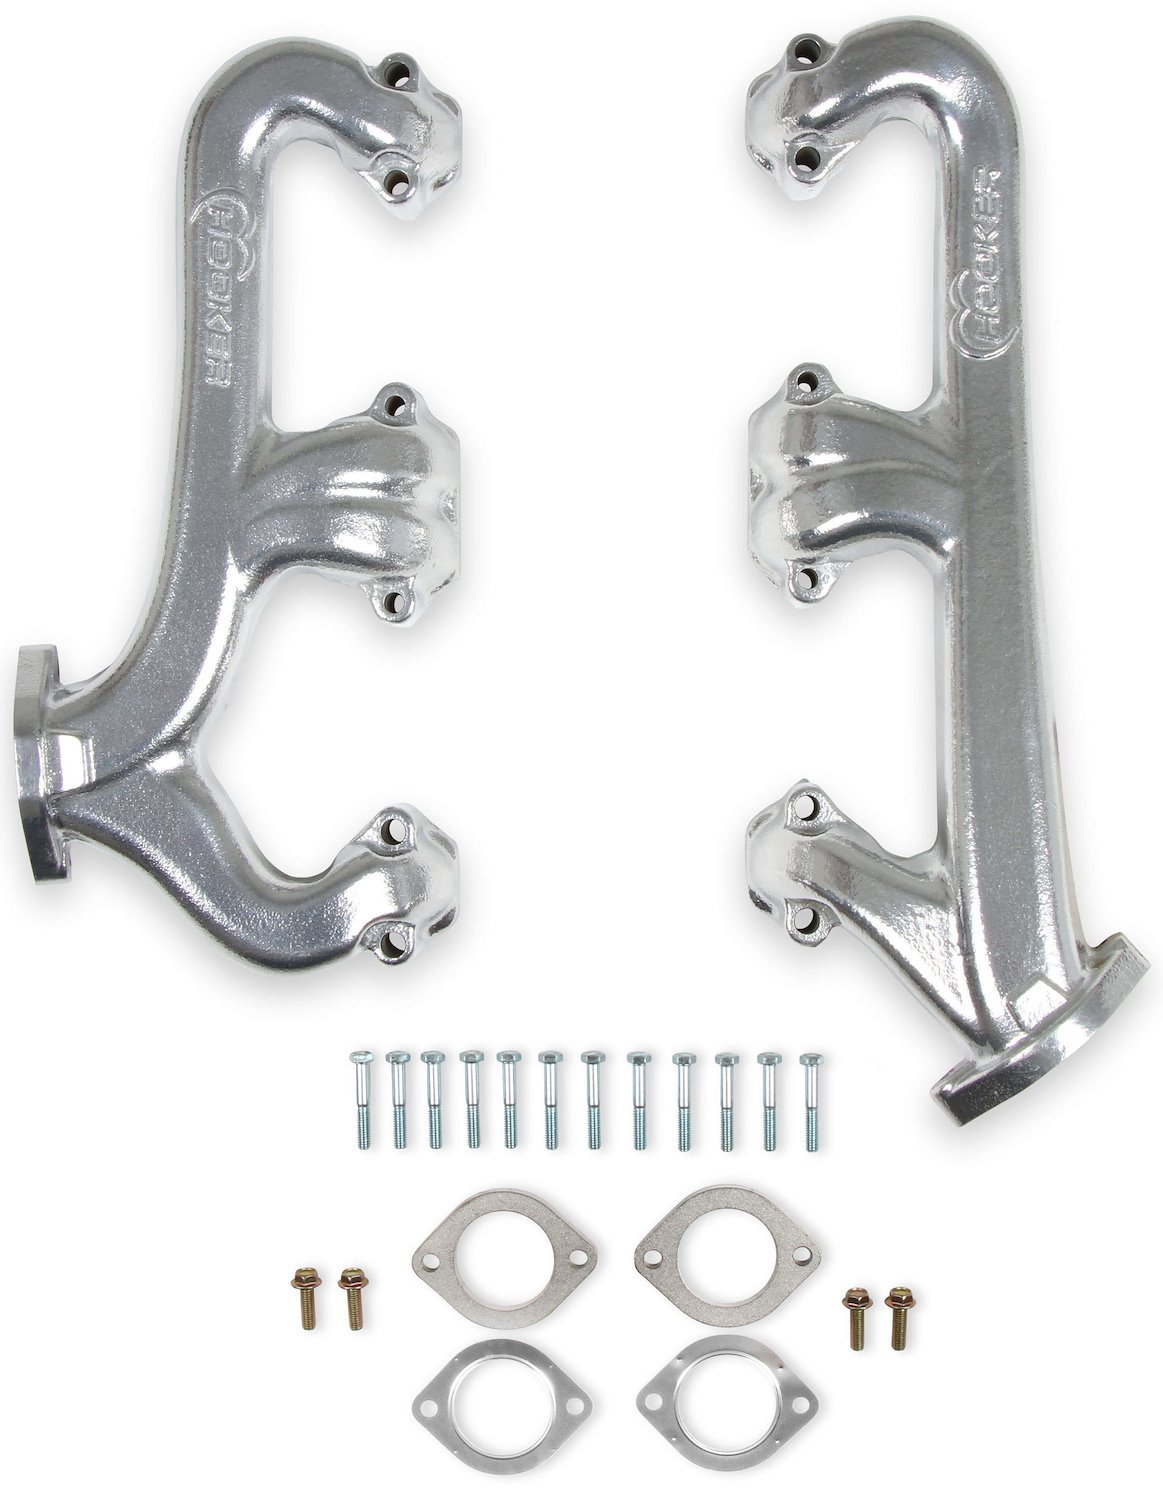 Exhaust Manifolds for Small Block Chevy 262-400 V8 (Gen I) [Silver Ceramic]